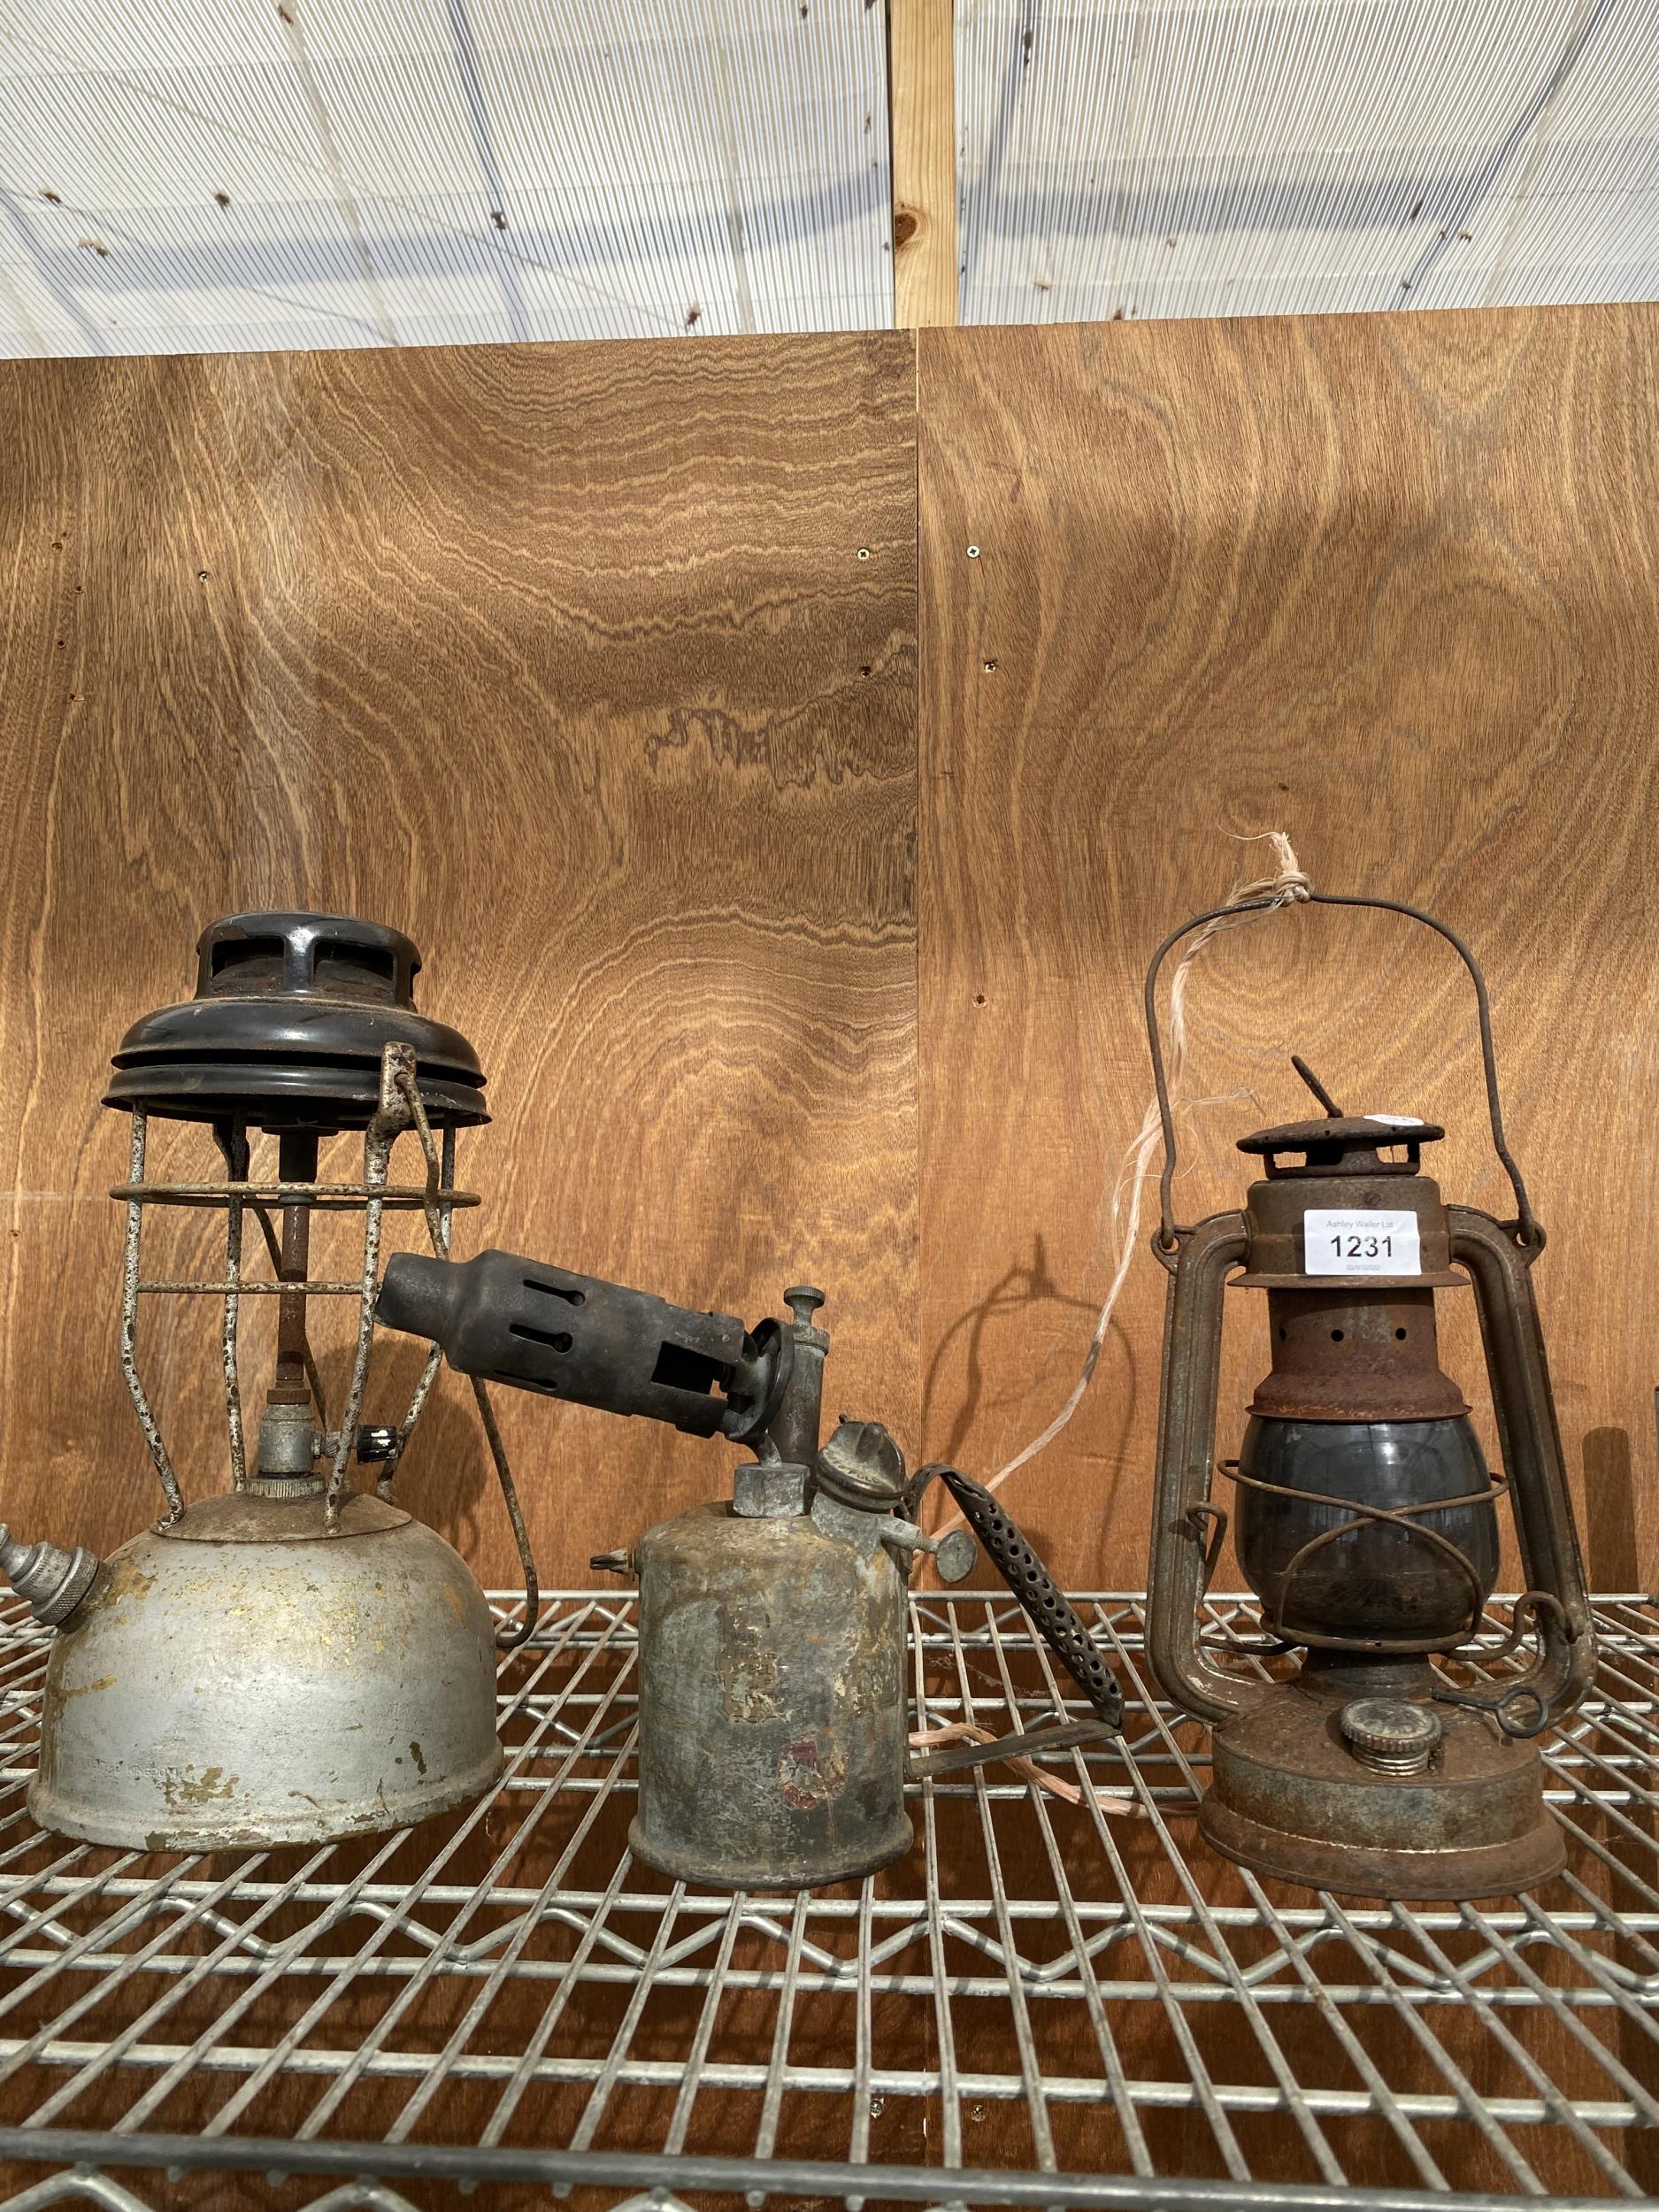 AN ASSORTMENT OF LAMPS AND BURNERS